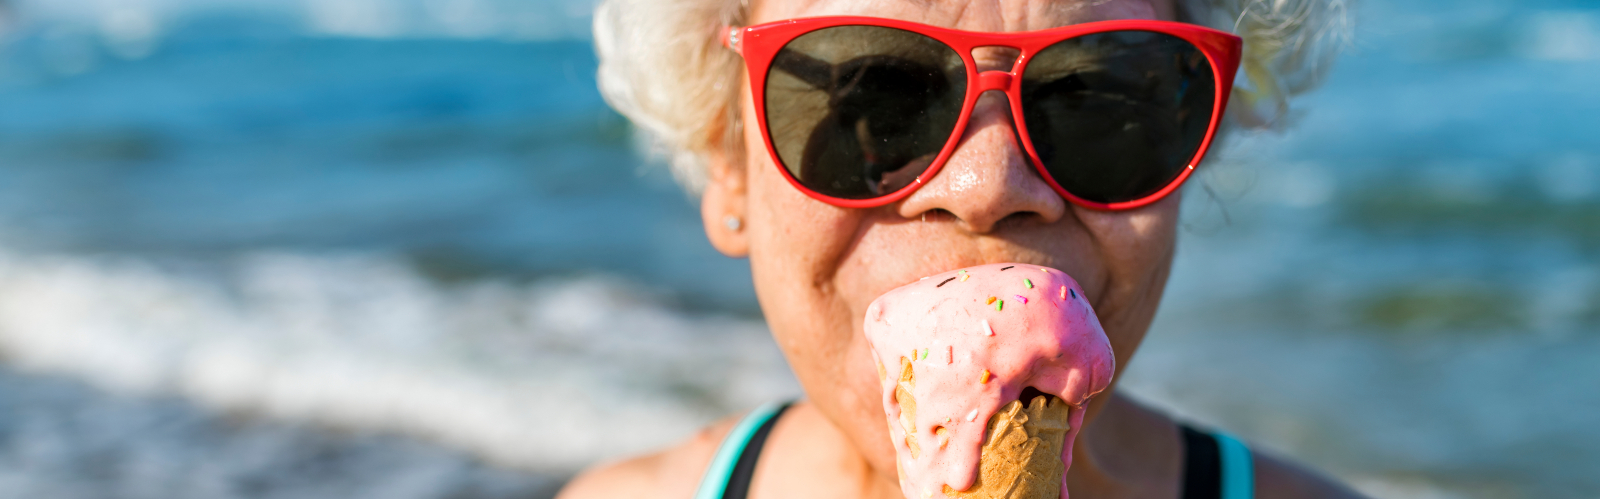 An older lady with sunglasses eats an ice cream by the sea